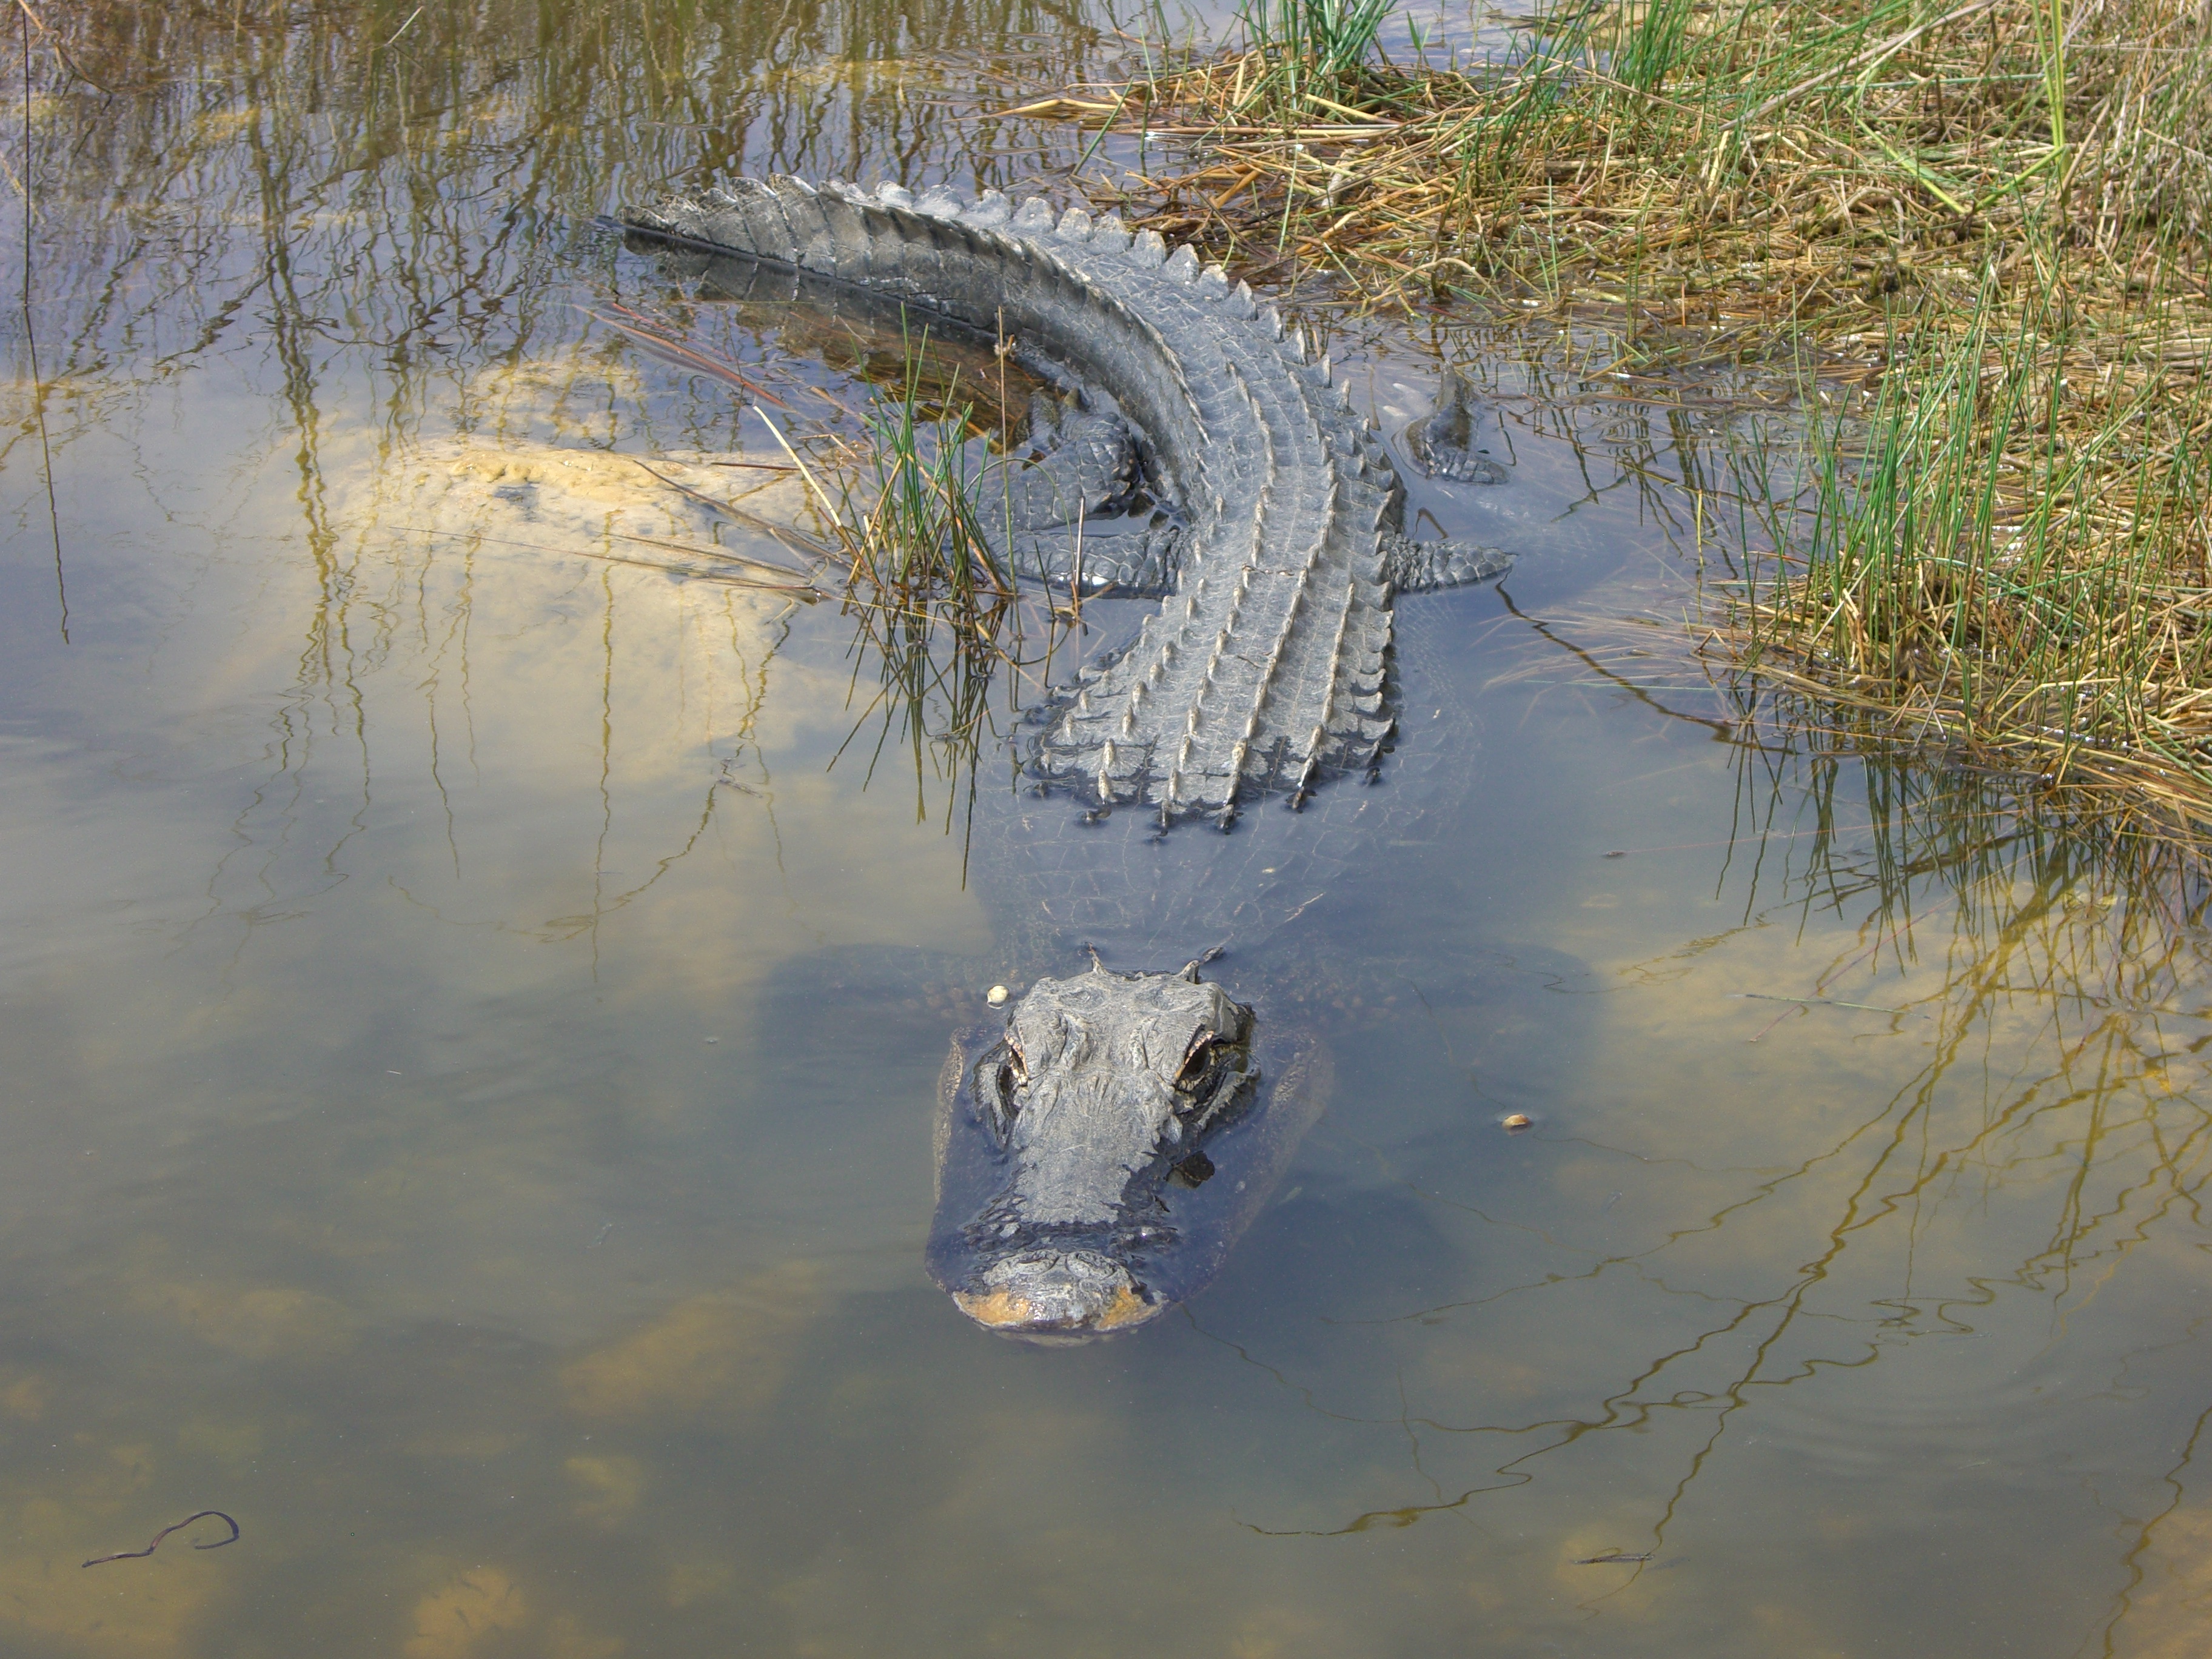 Alligator in the Everglades | The Outdoors Guy